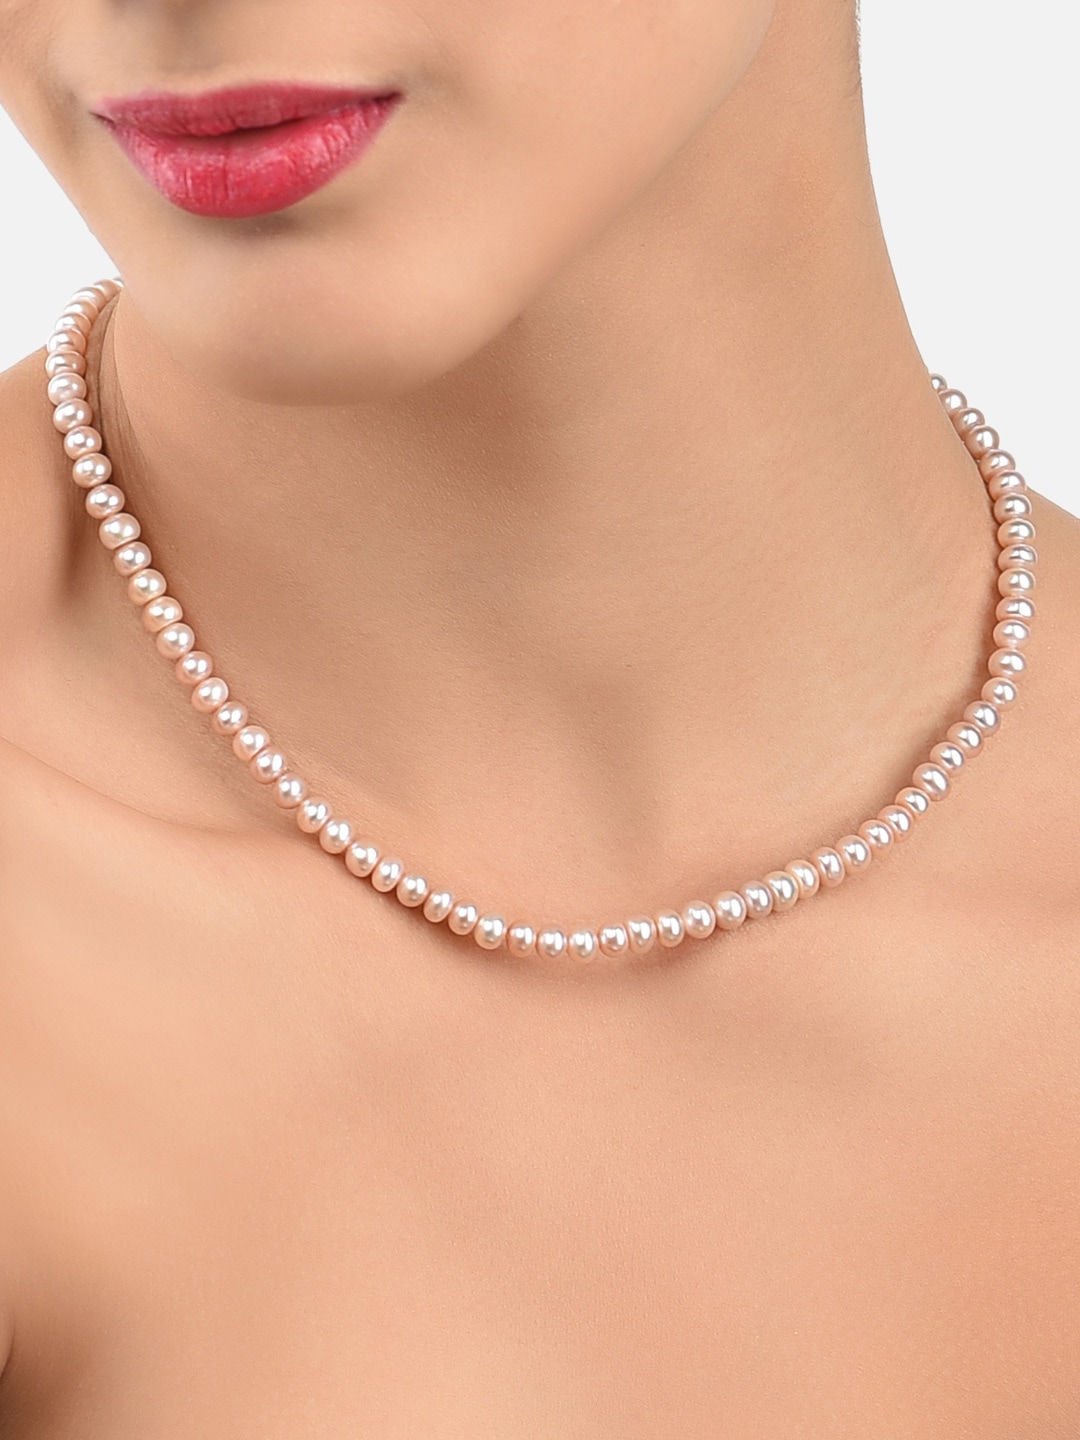 Zaveri Pearls Fresh Water Button Pearls 5-6mm AAA+ Quality Necklace Price in India